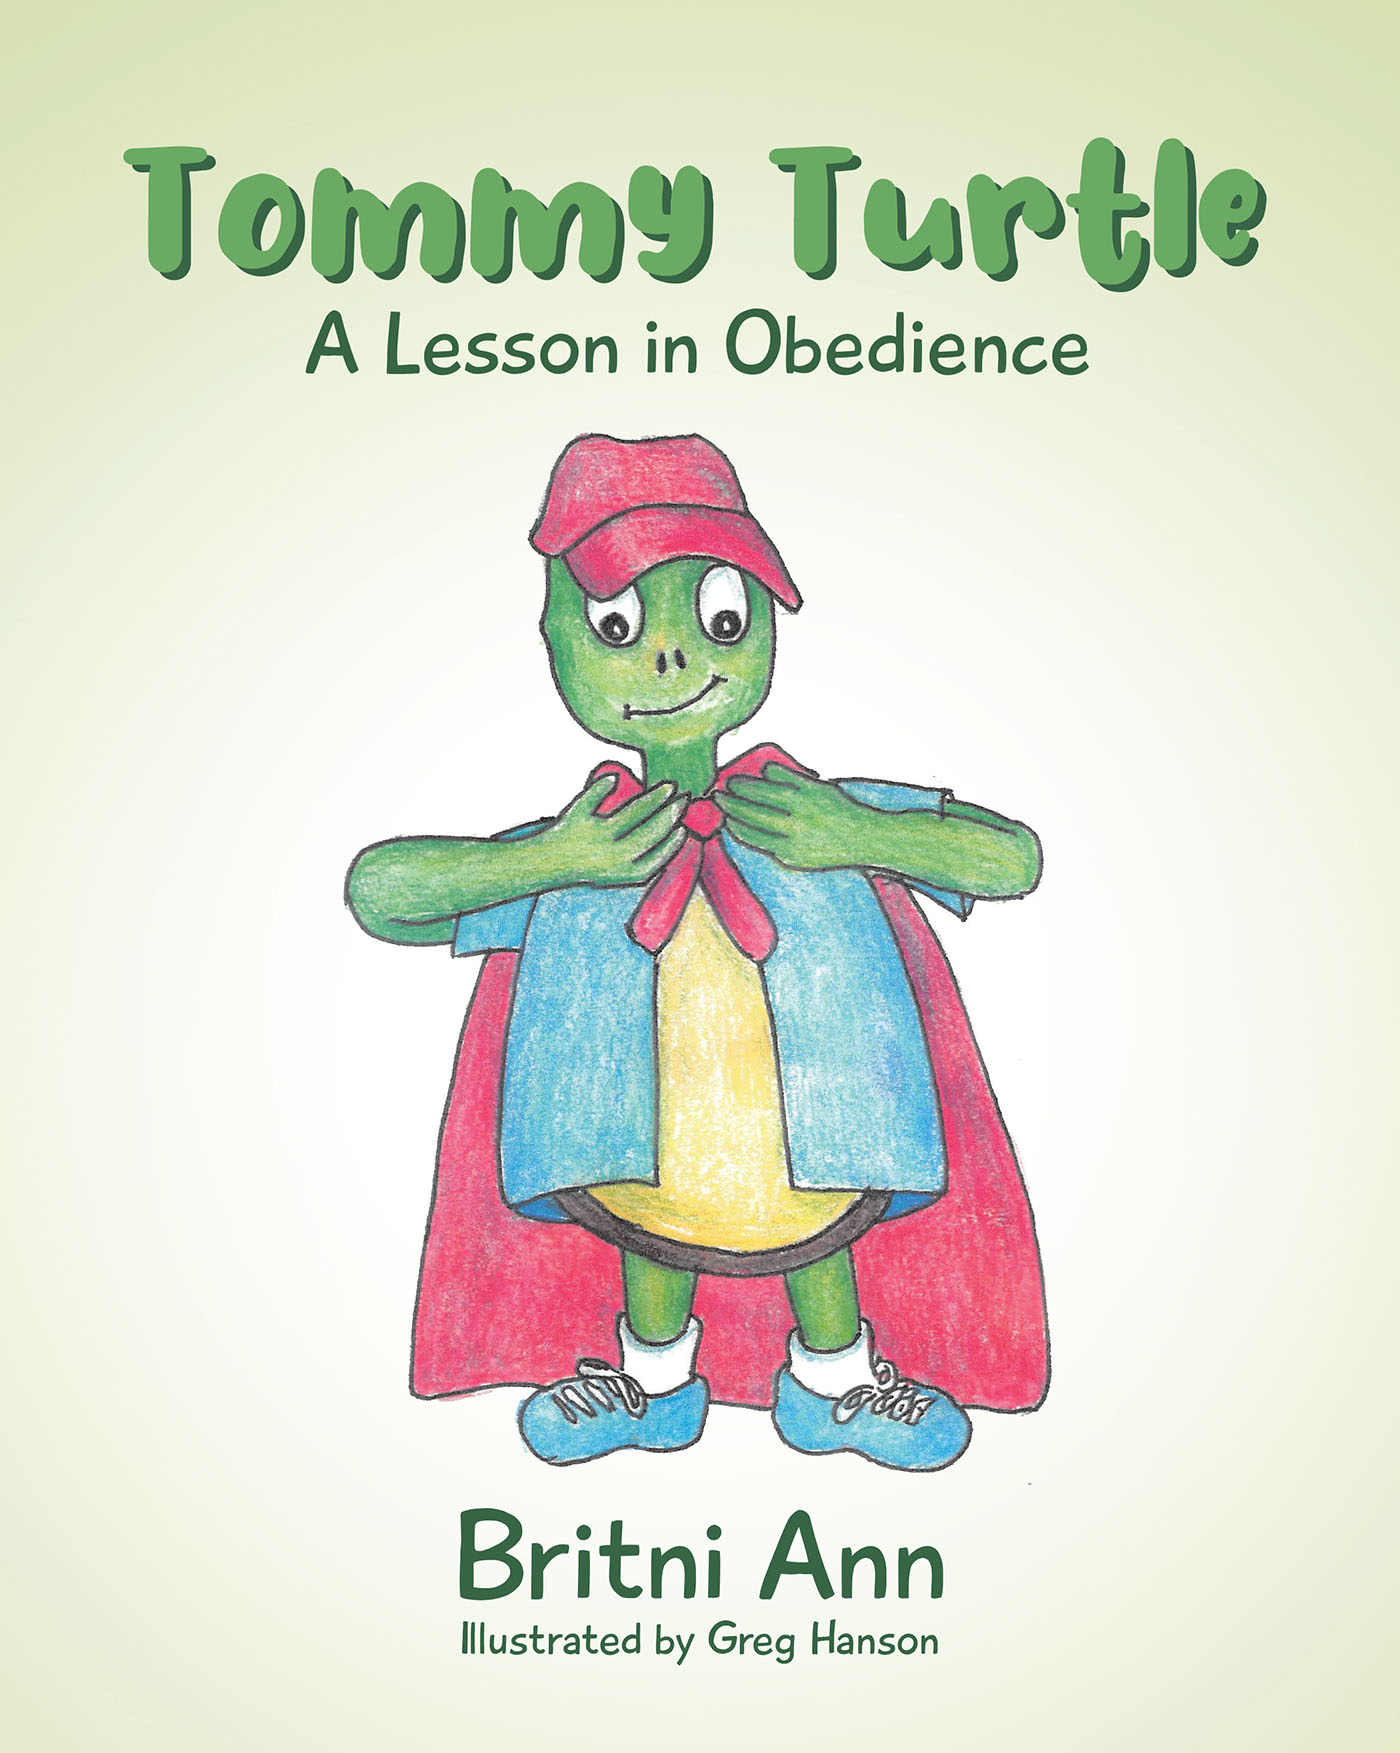 Author Britni Ann and Illustrator Greg Hanson’s New Book, "Tommy Turtle: A Lesson in Obedience," Explores the Importance of Obeying One’s Parents as God Intends